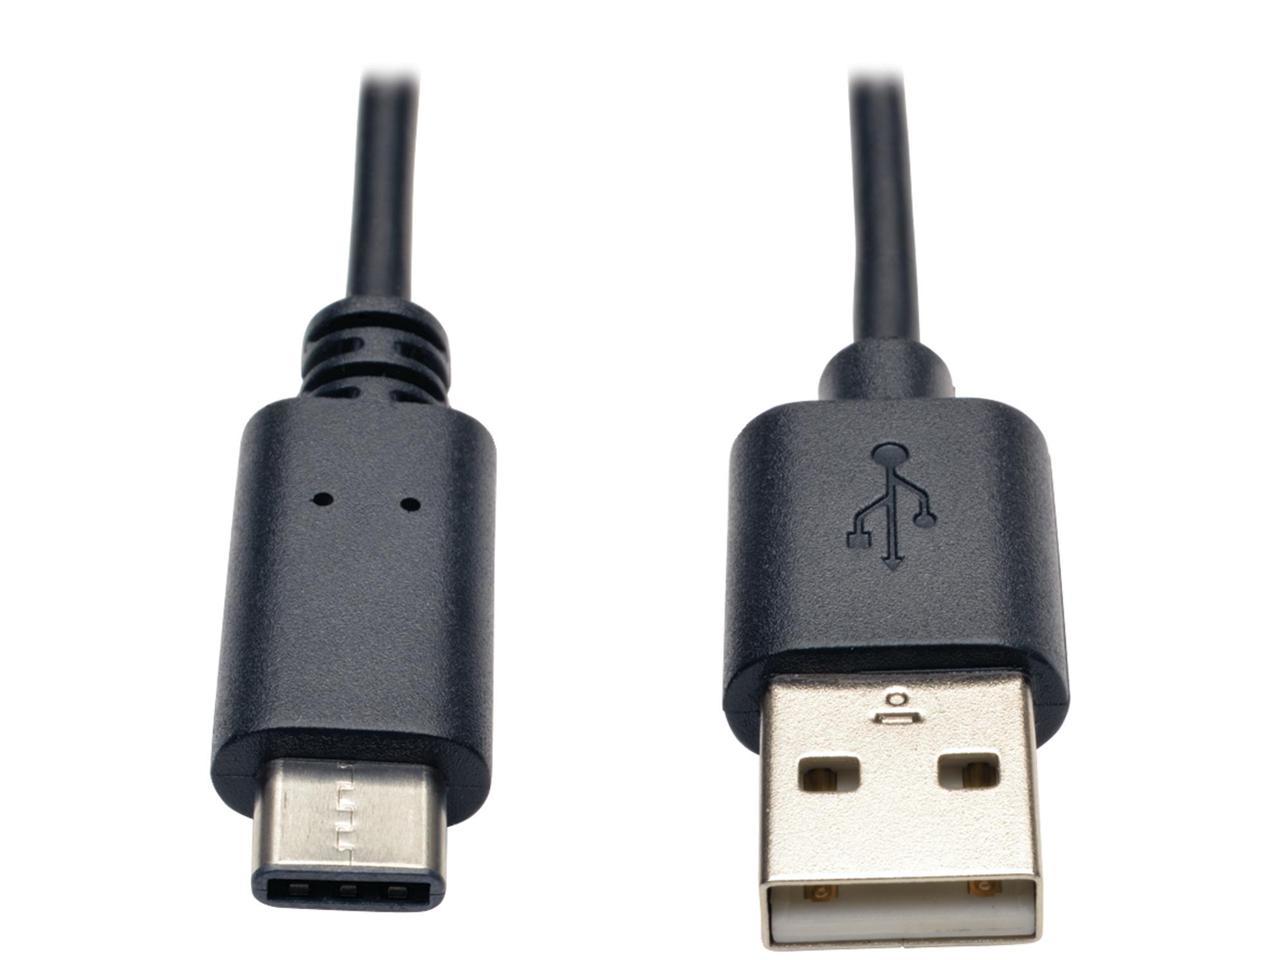 Tripp Lite USB 2.0 Hi-Speed Cable (A Male to USB Type-C Male), 3-ft. - image 1 of 15